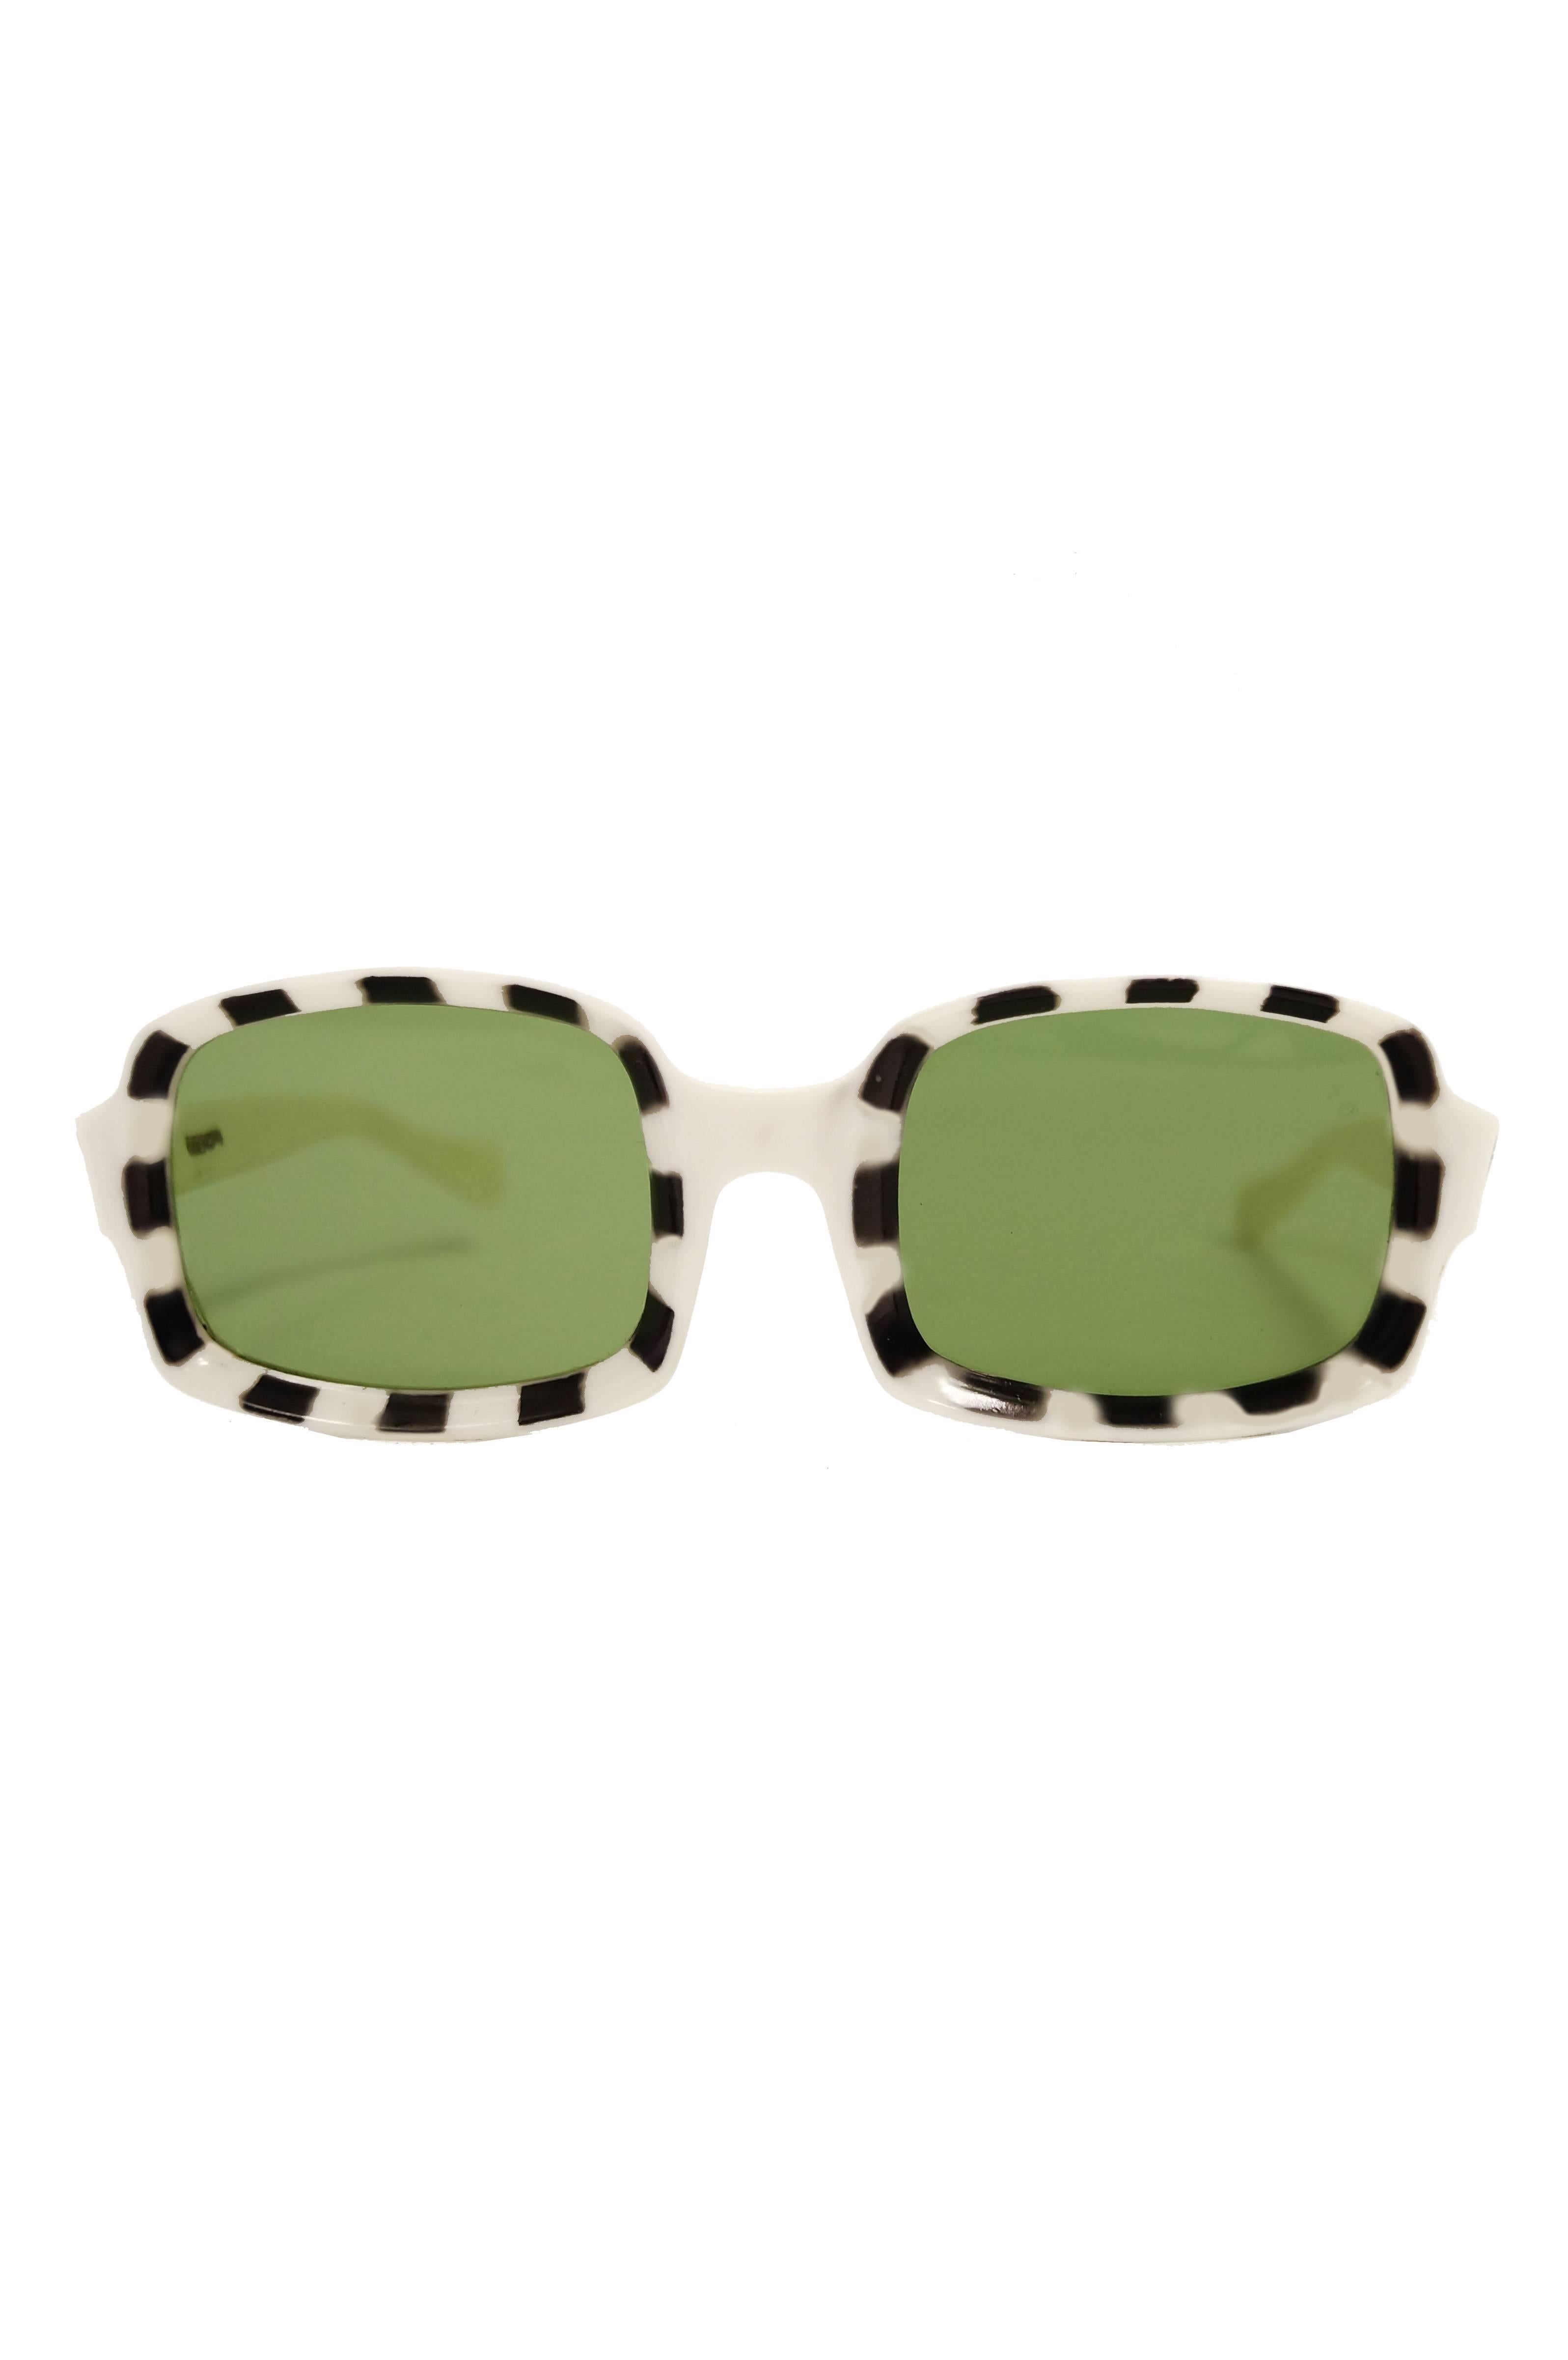 Amazing white and black frame Italian mod glasses. These authentic 1960s glasses feature rectangular green lenses with black and white checkered frames. The angular shape of the glasses is a fantastic, original take on mod frames, which are usually